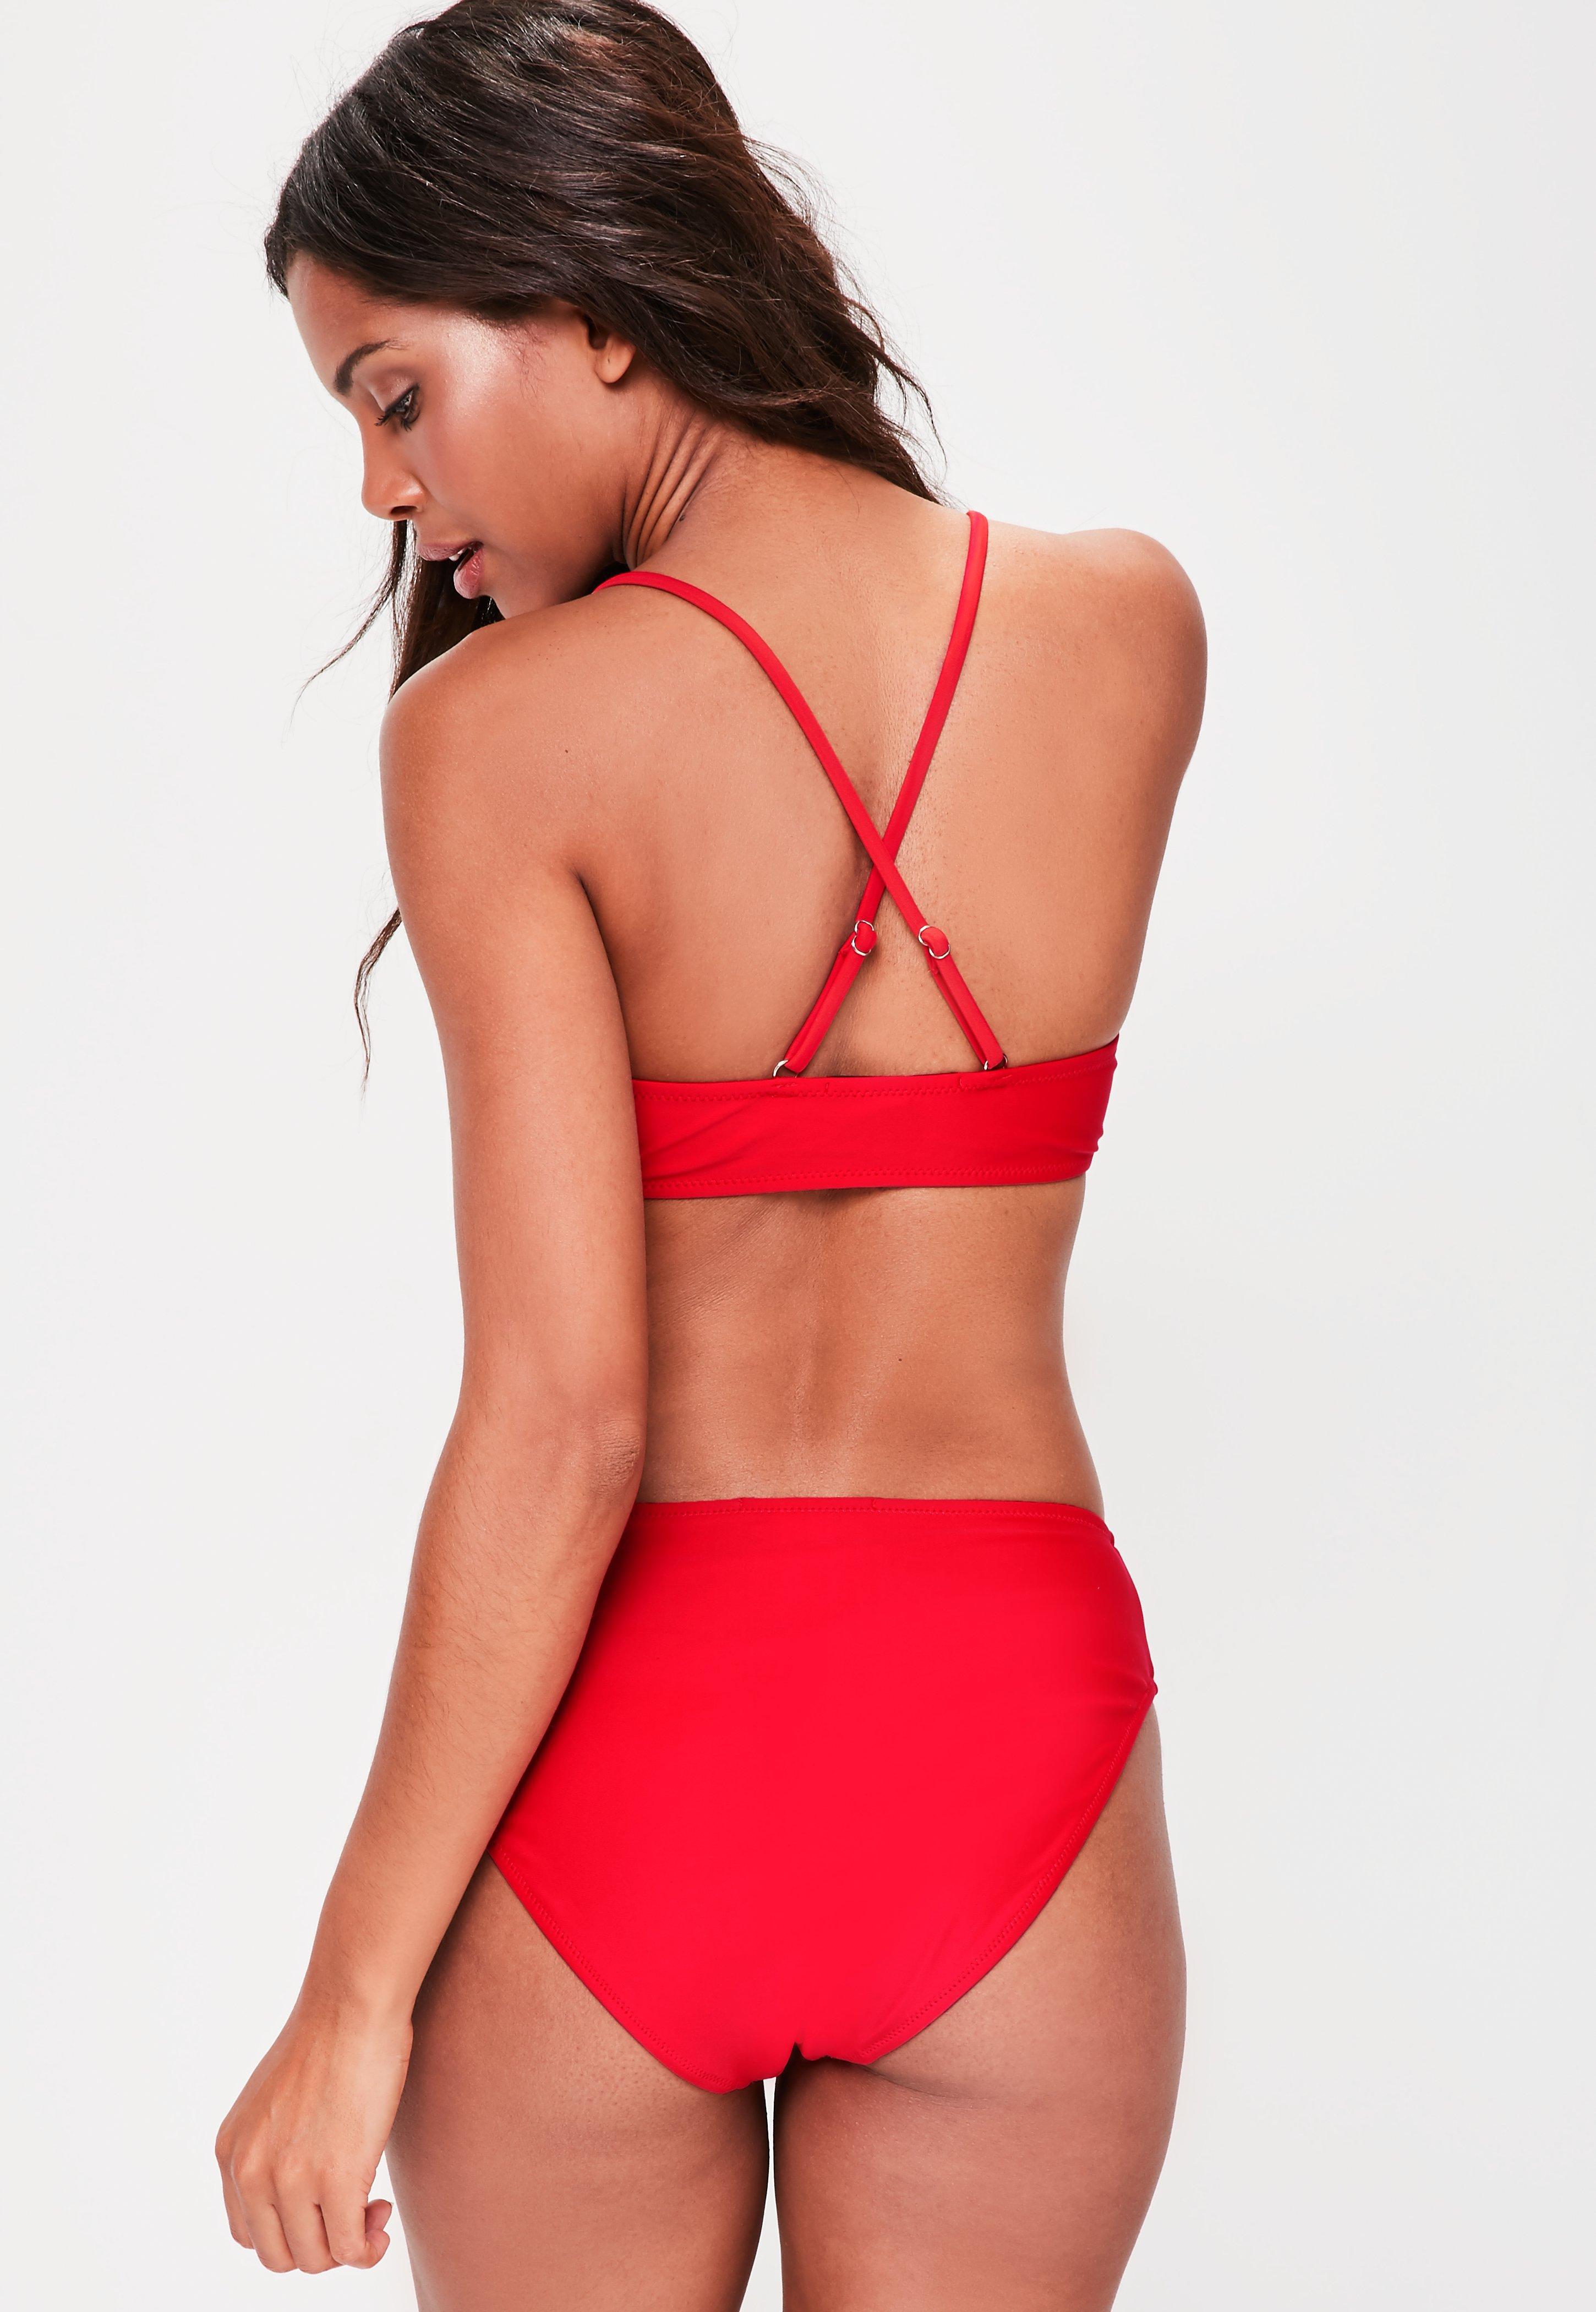 Lyst Missguided Red High Waist Bikini Bottoms Mix And Match In Red 4578